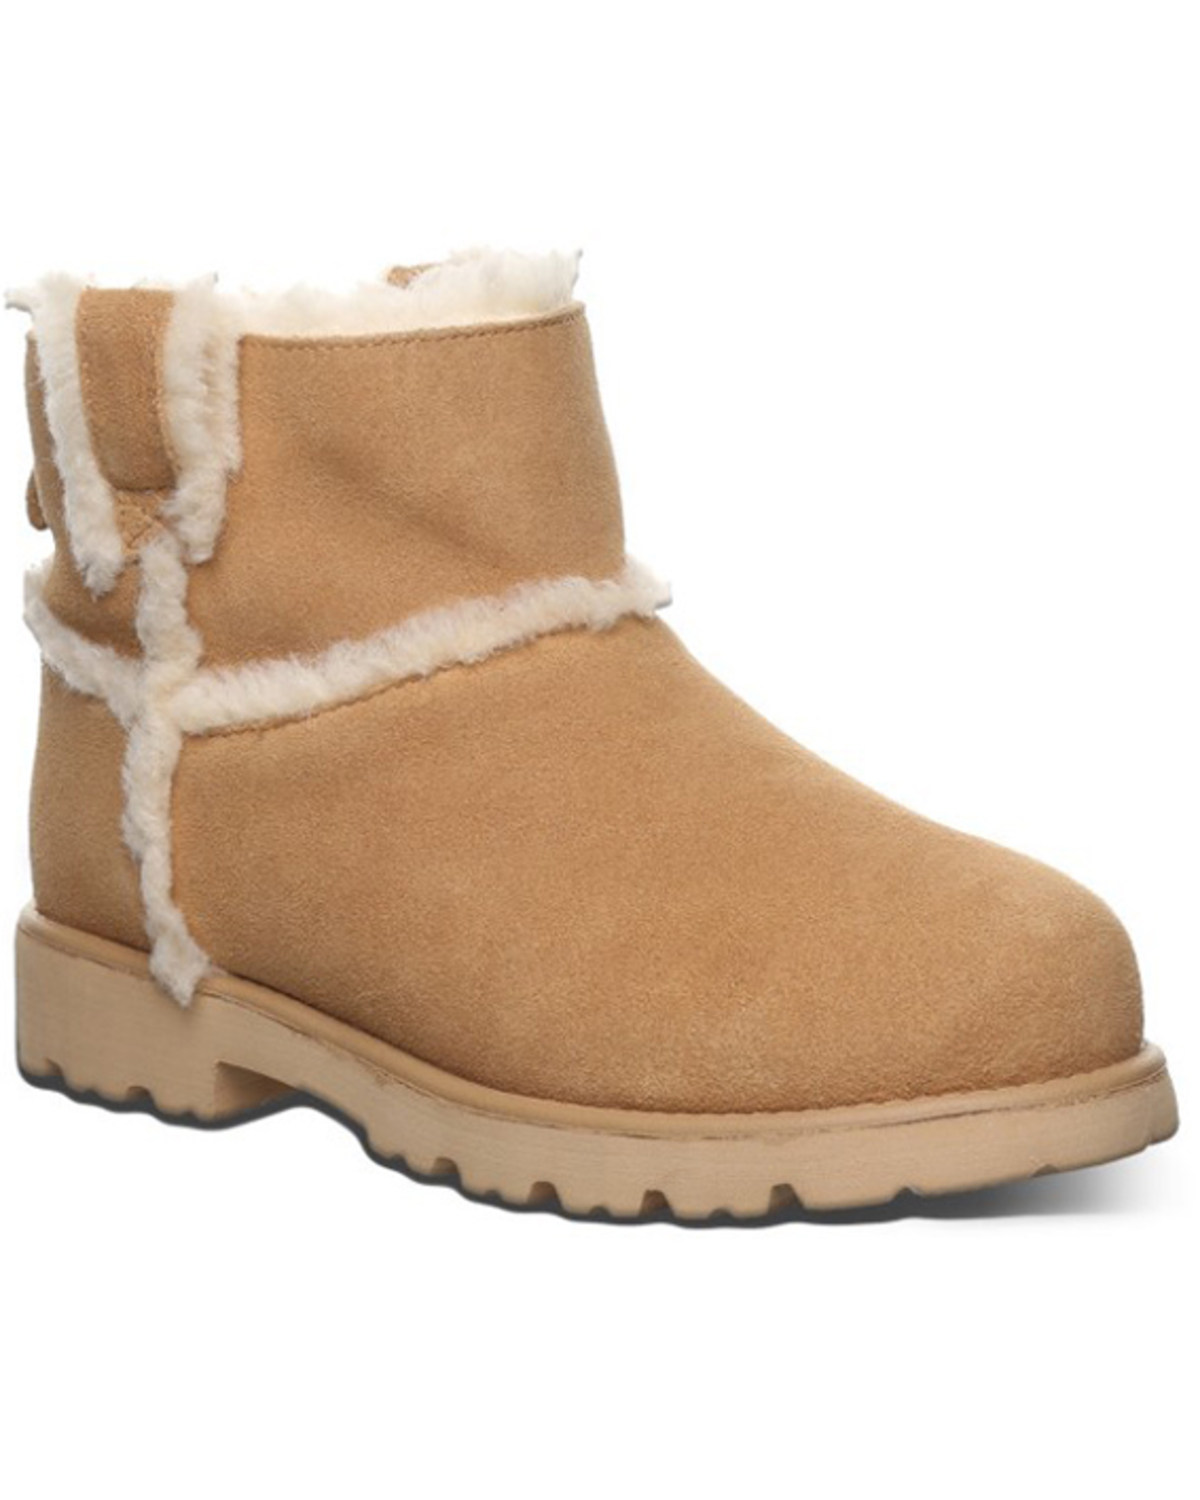 Bearpaw Women's Willow Casual Boots - Round Toe